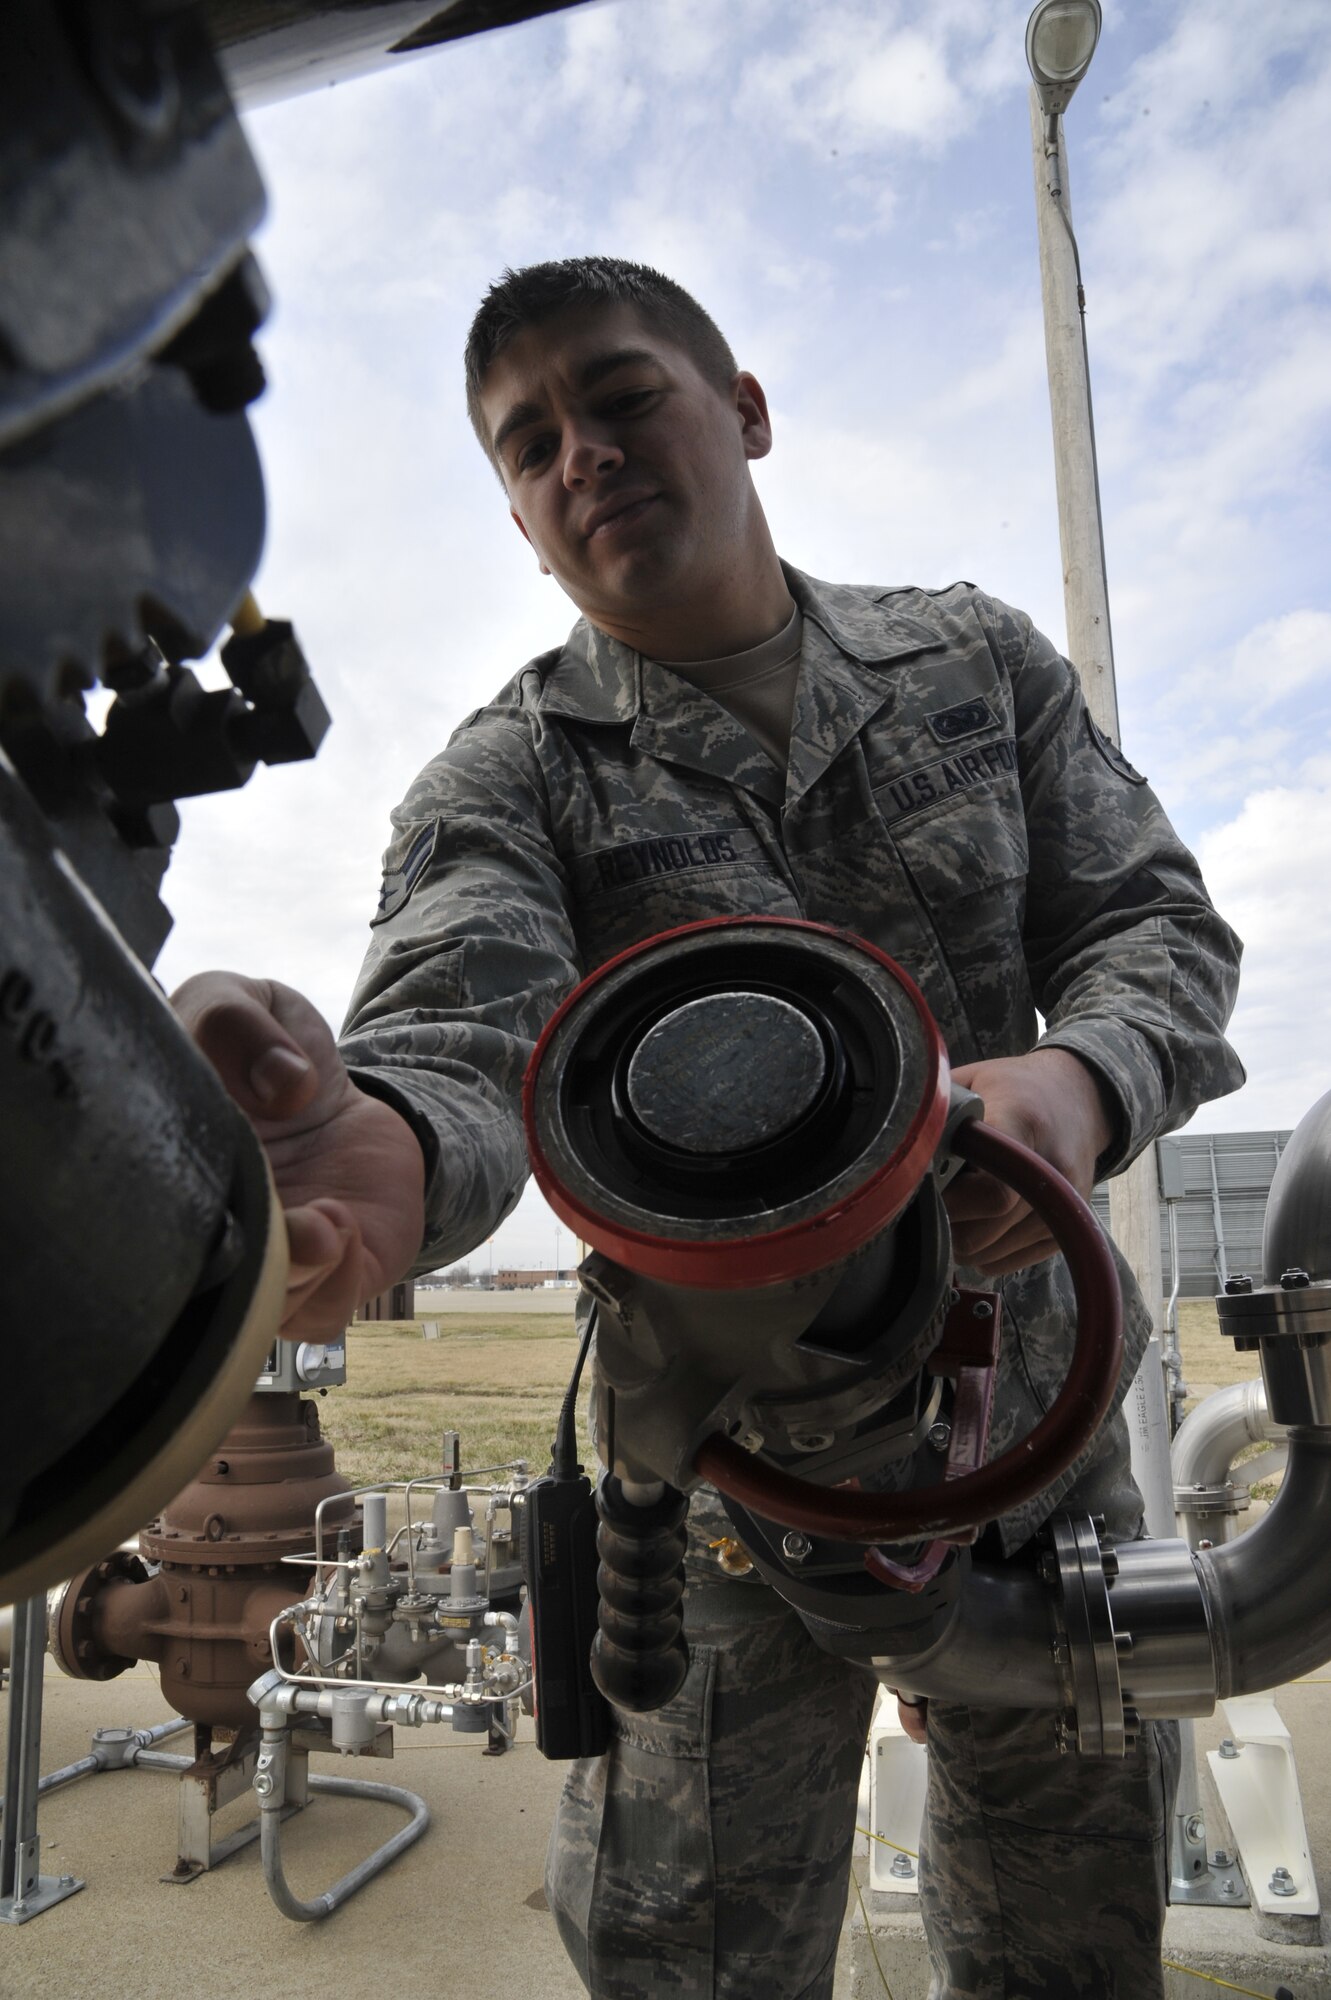 U.S. Air Force Airman 1st Class Joshua Reynolds, 509th Logistics Readiness Squadron fuels distribution technician, disconnects a single point nozzle from an R-11 fuel truck at Whiteman Air Force Base, Mo. April 1, 2014. The single point nozzle attaches to the bottom loader to verify that the metered fill issued prior to filling. (U.S. Air Force photo by Airman 1st Class Keenan Berry/Released)  